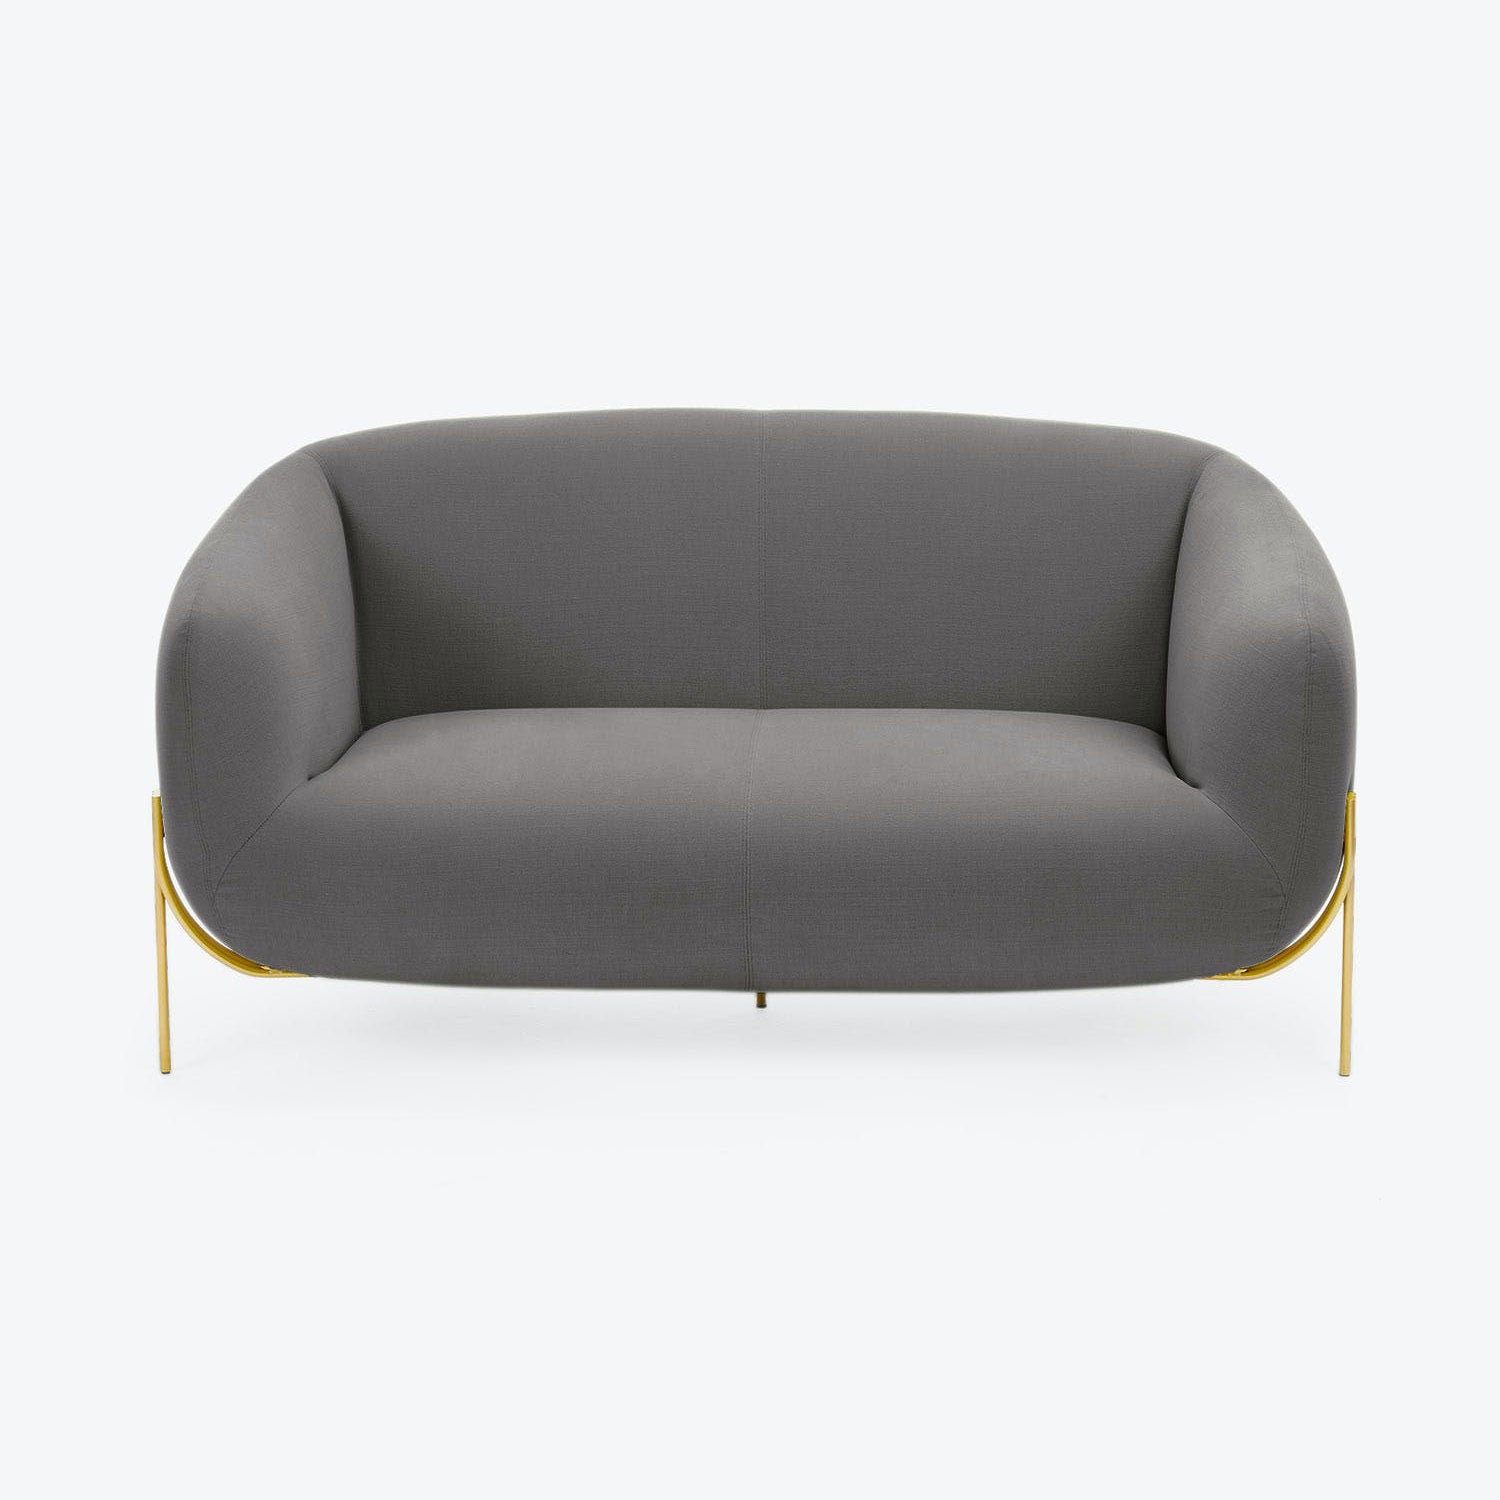 Modern grey sofa with curved backrest and elegant gold legs.